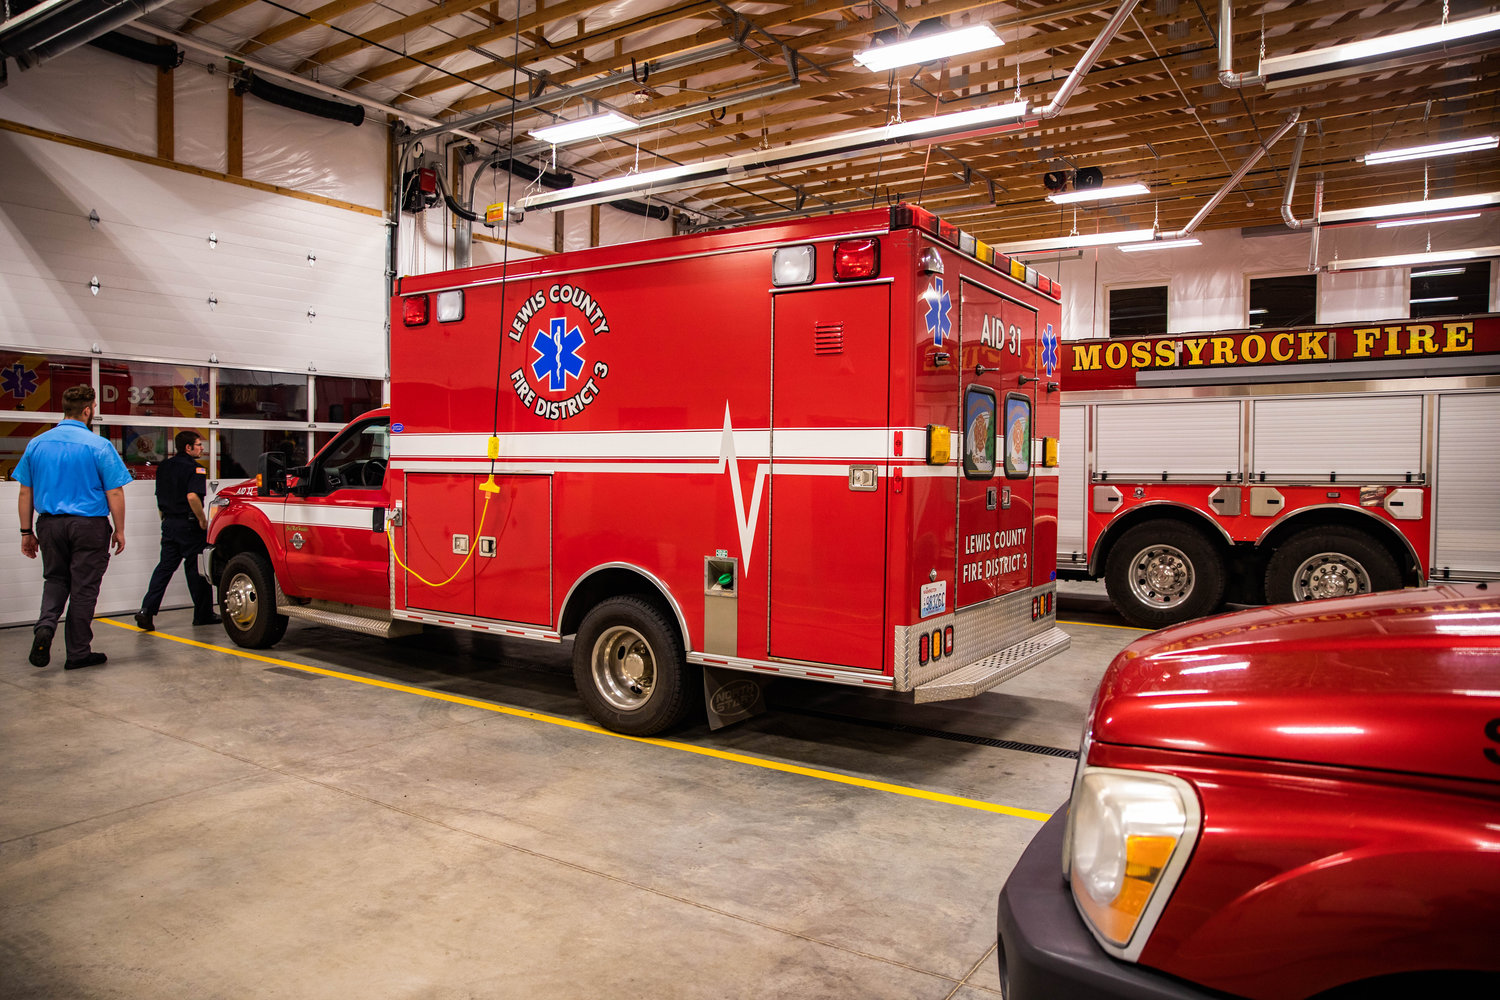 Ambulances and fire engines sit on display Monday night at the Lewis County Fire District 3 building in Mossyrock.